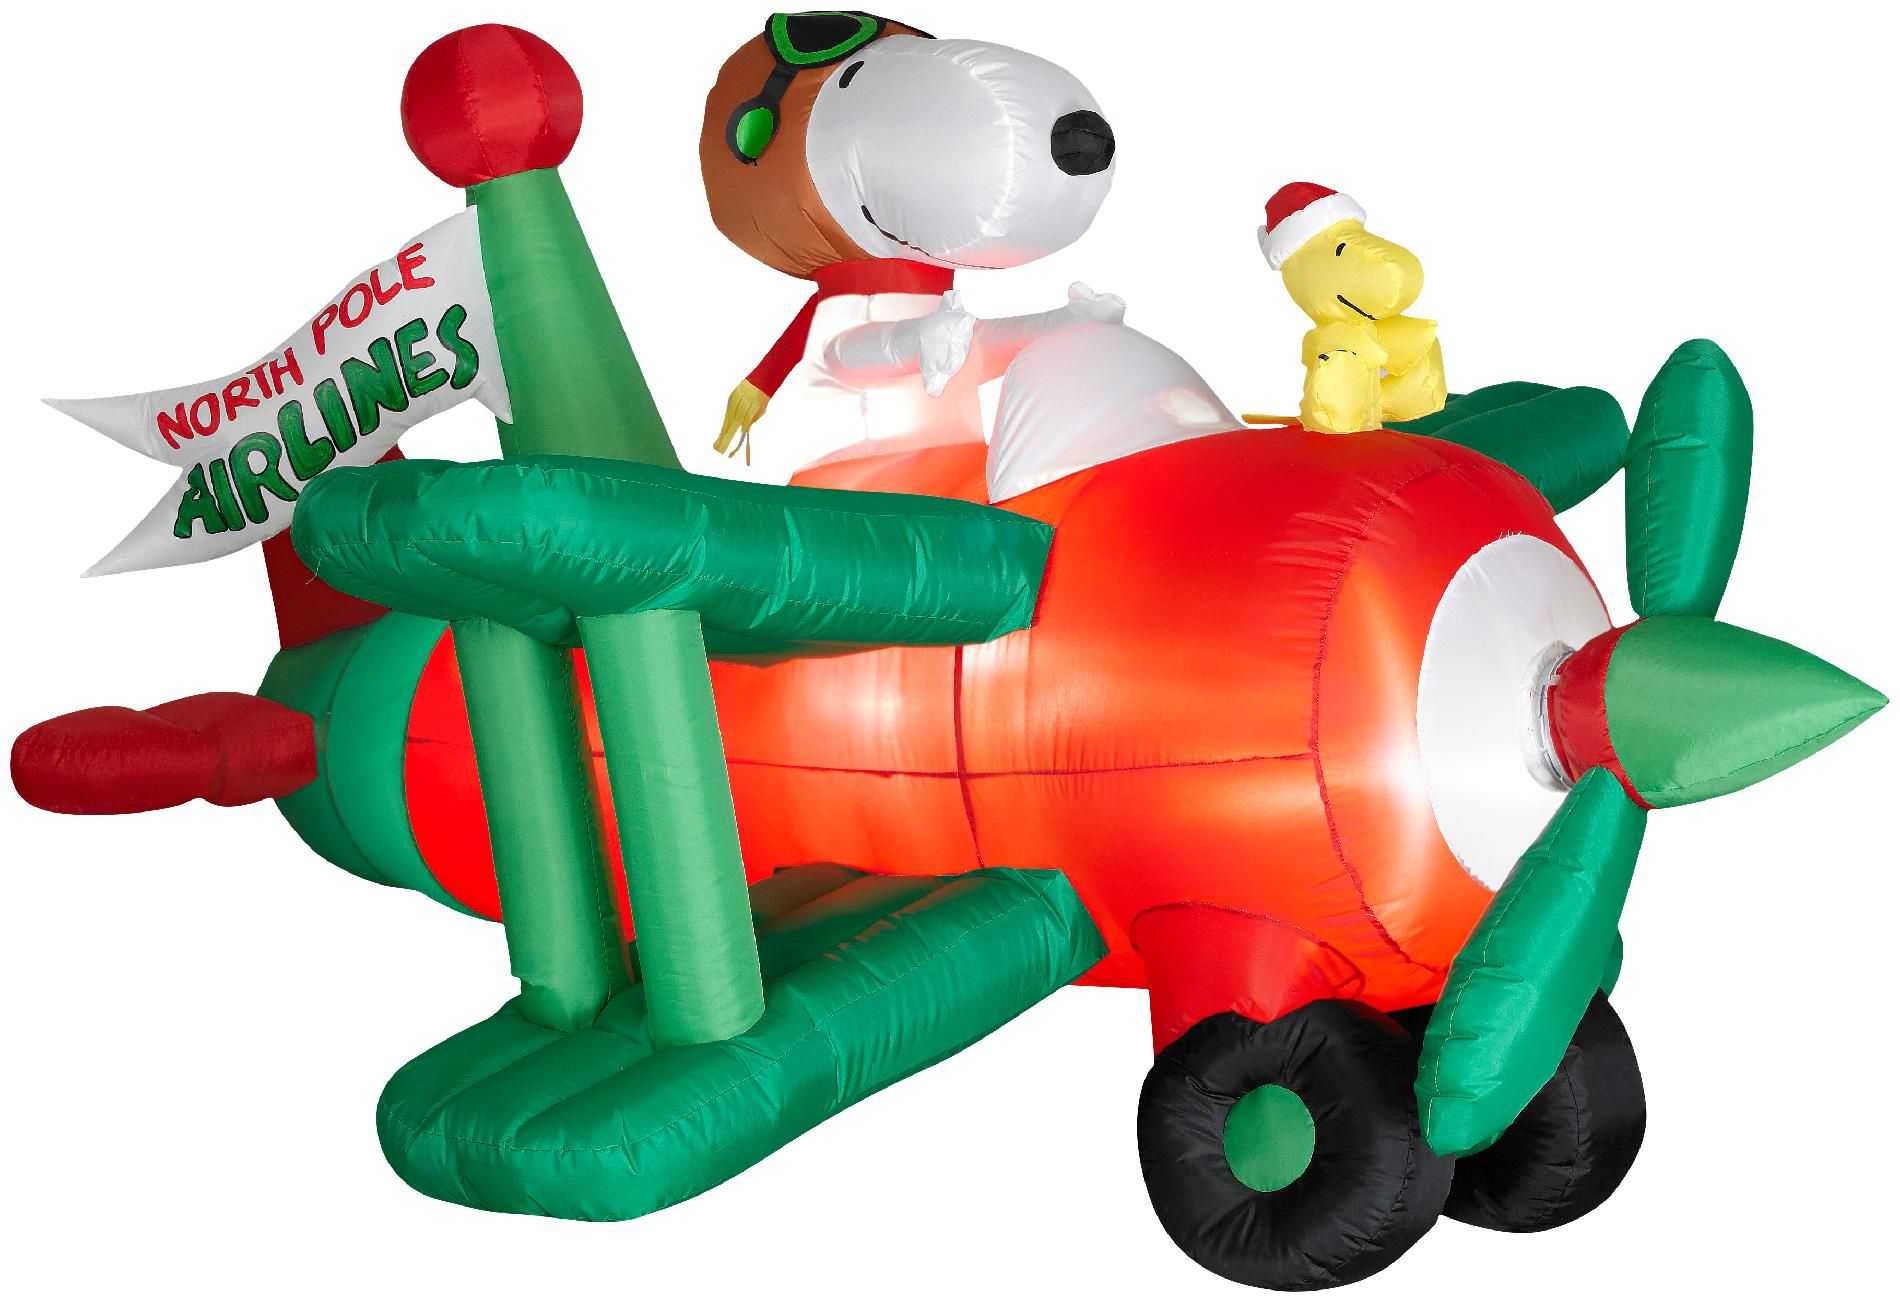 Peanuts By Schulz 3.5 Foot Inflatable Snoopy in Bi-Plane